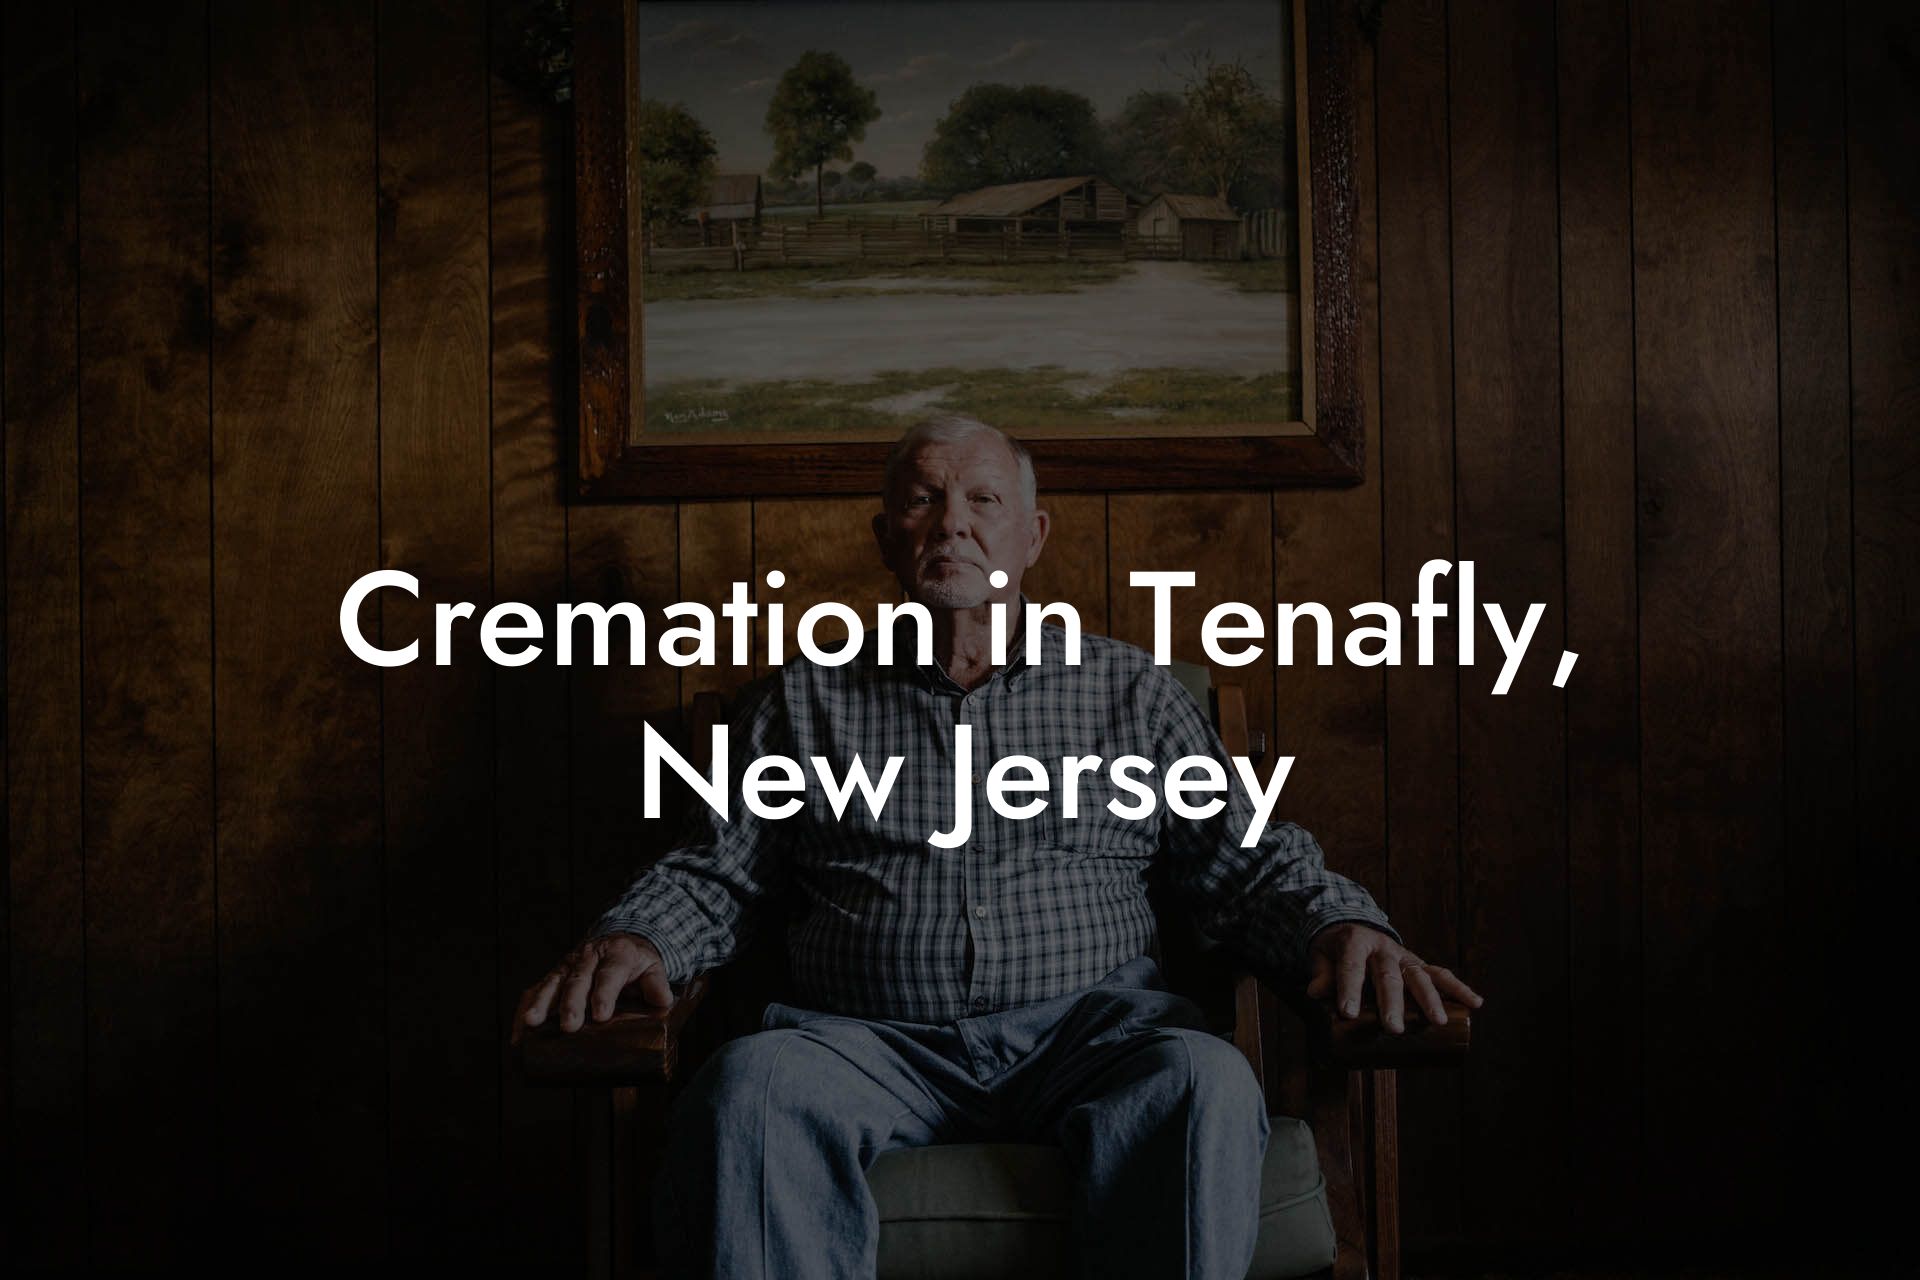 Cremation in Tenafly, New Jersey